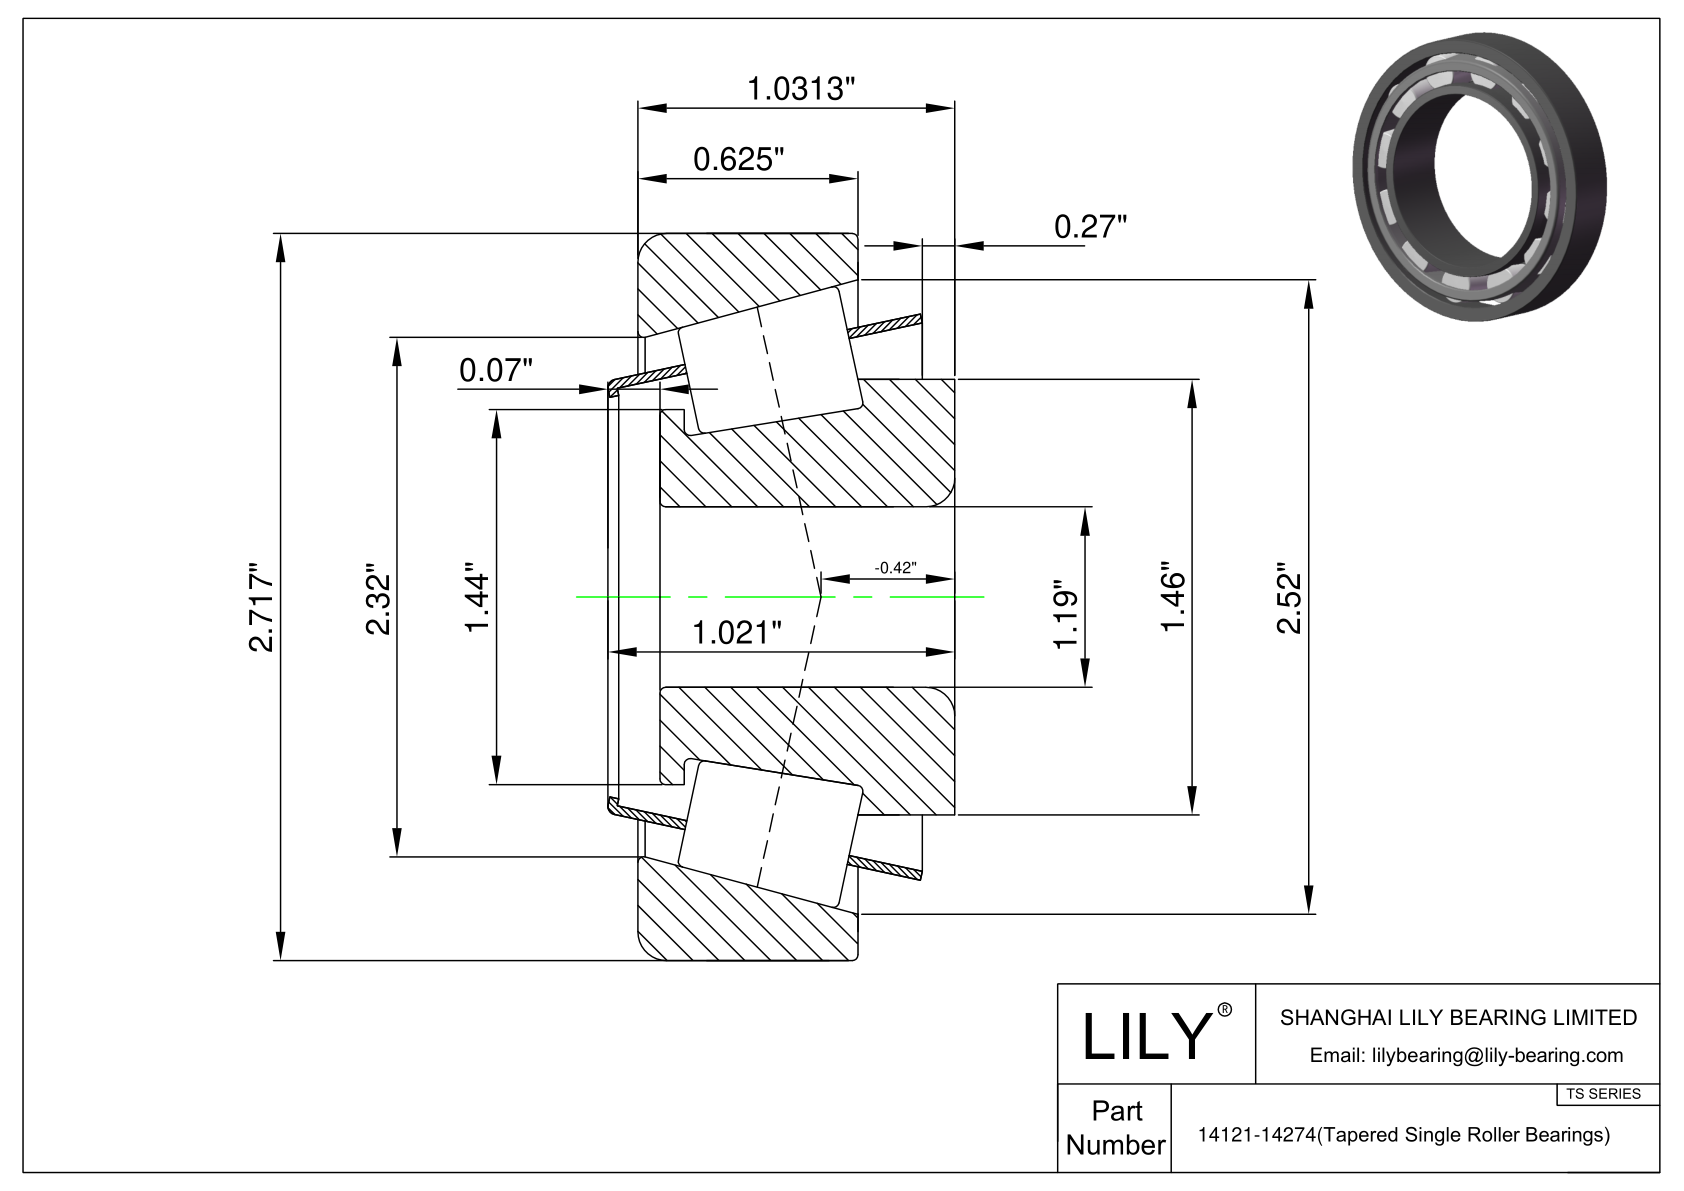 14121-14274 TS (Tapered Single Roller Bearings) (Imperial) cad drawing